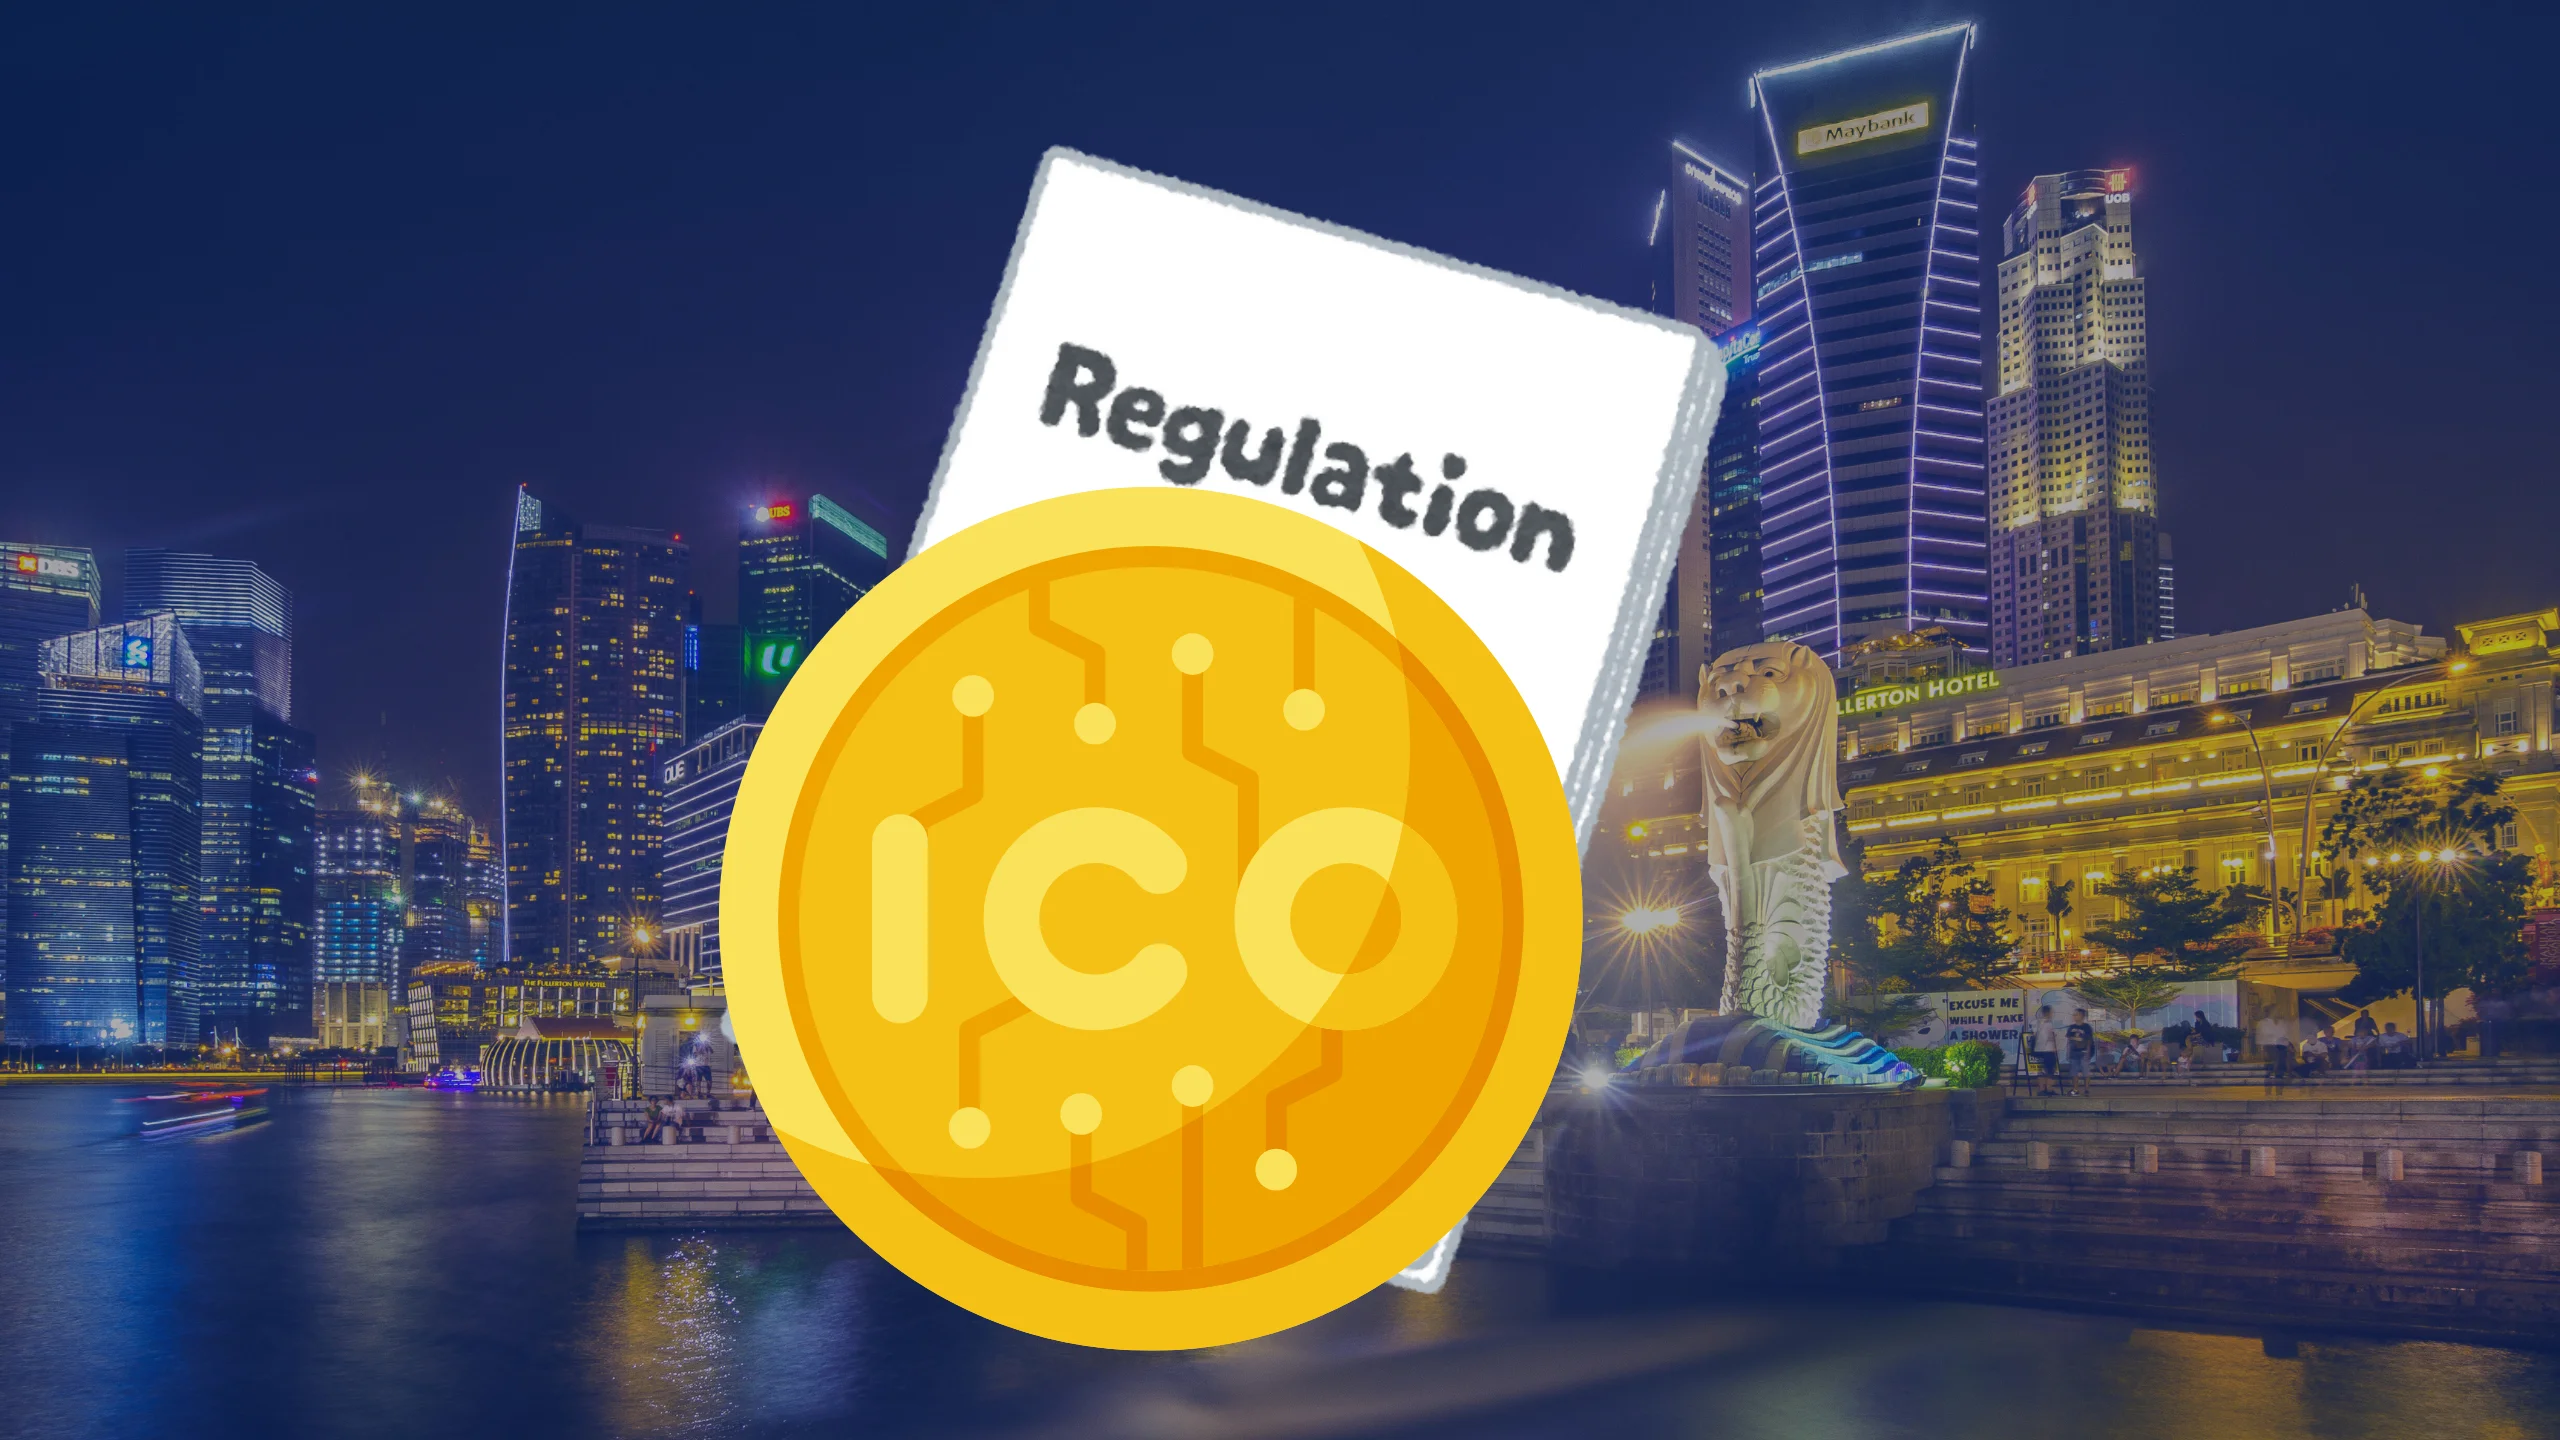 Overview of ICO regulations in Singapore, focusing on legal compliance and guidelines for cryptocurrency projects.